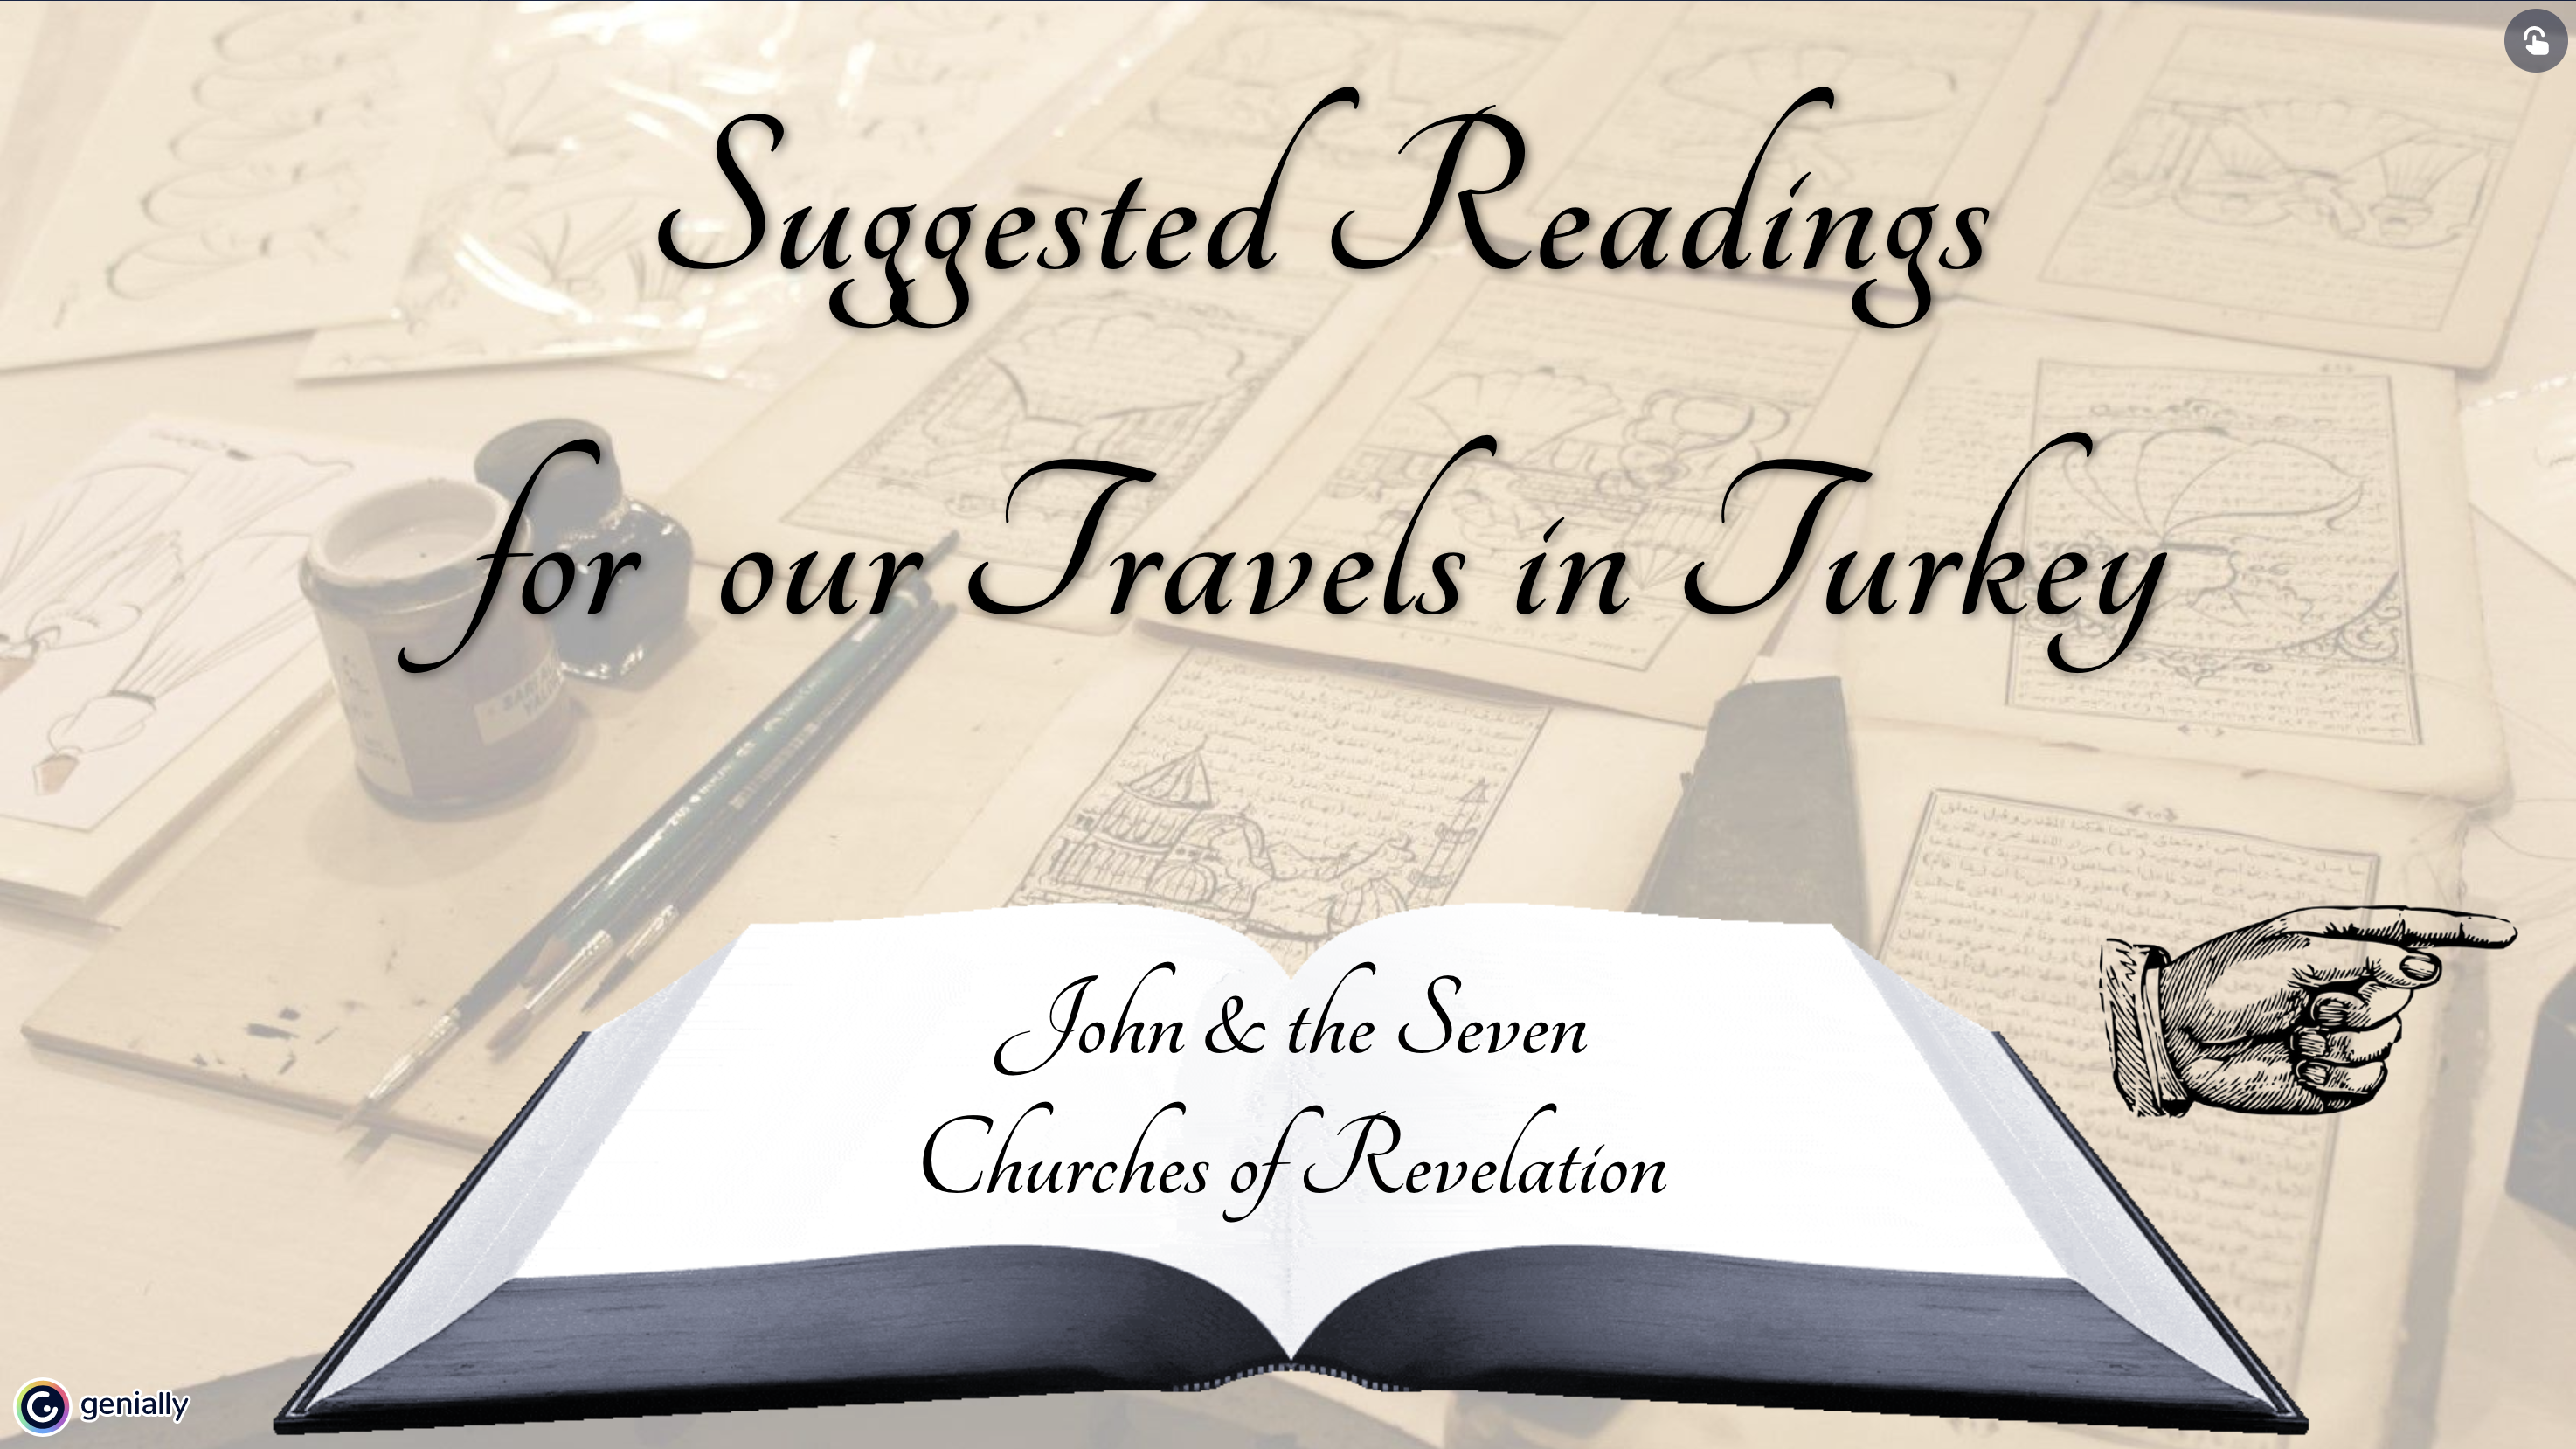 Suggested reading list for "John & the Seven Churches of Revelation" 